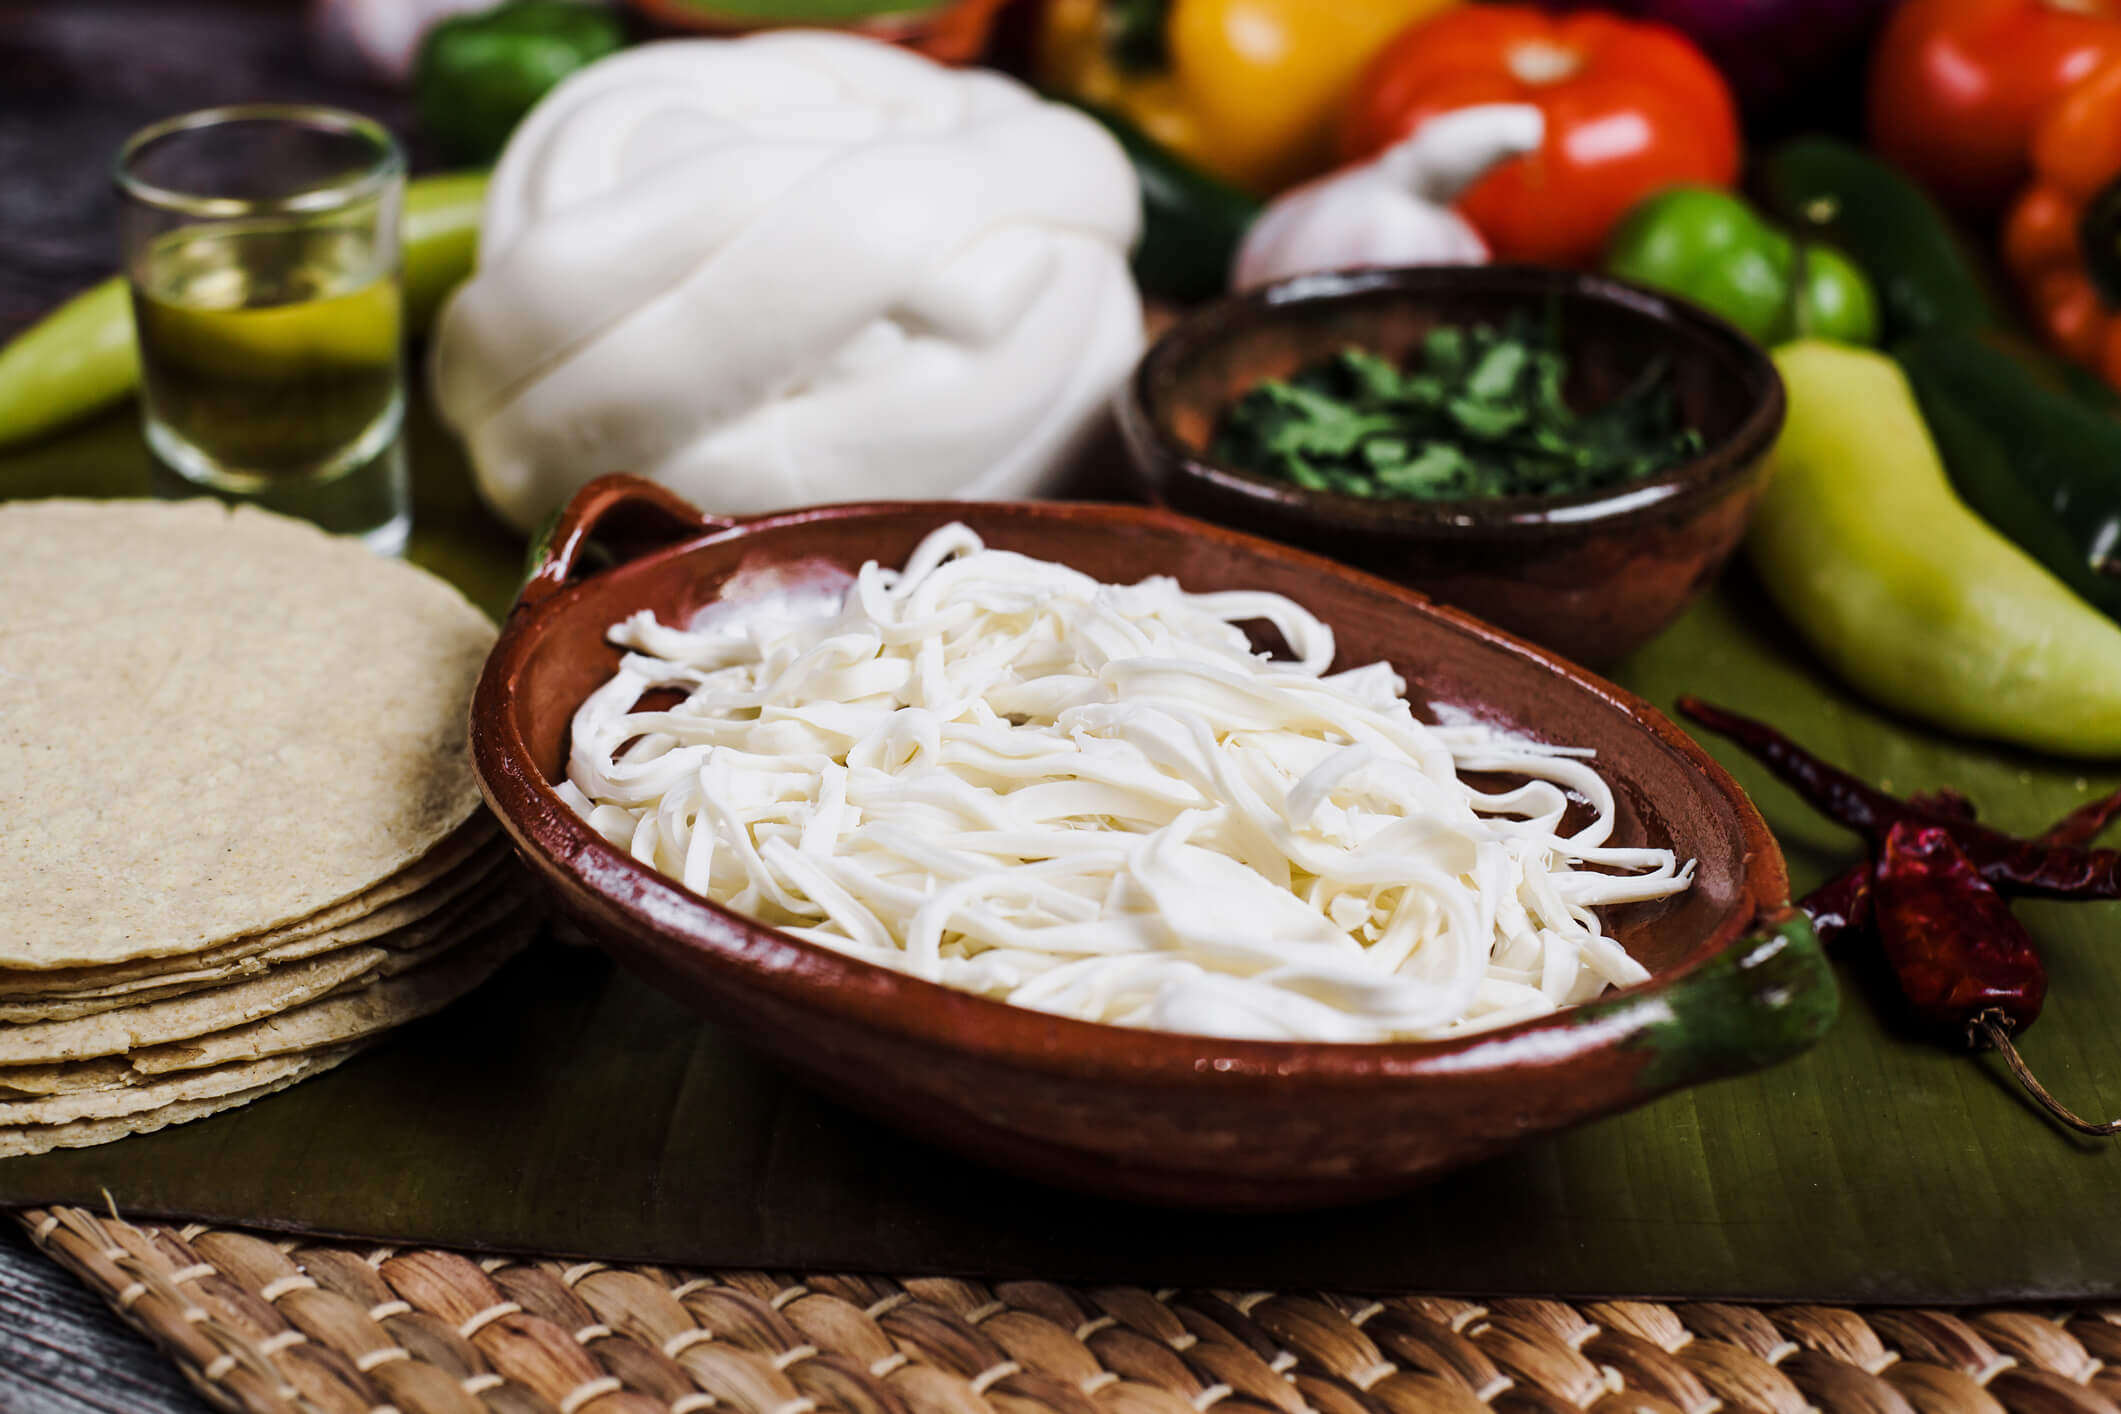 Oaxaca cheese, perfect as a Mexican Frying Cheese